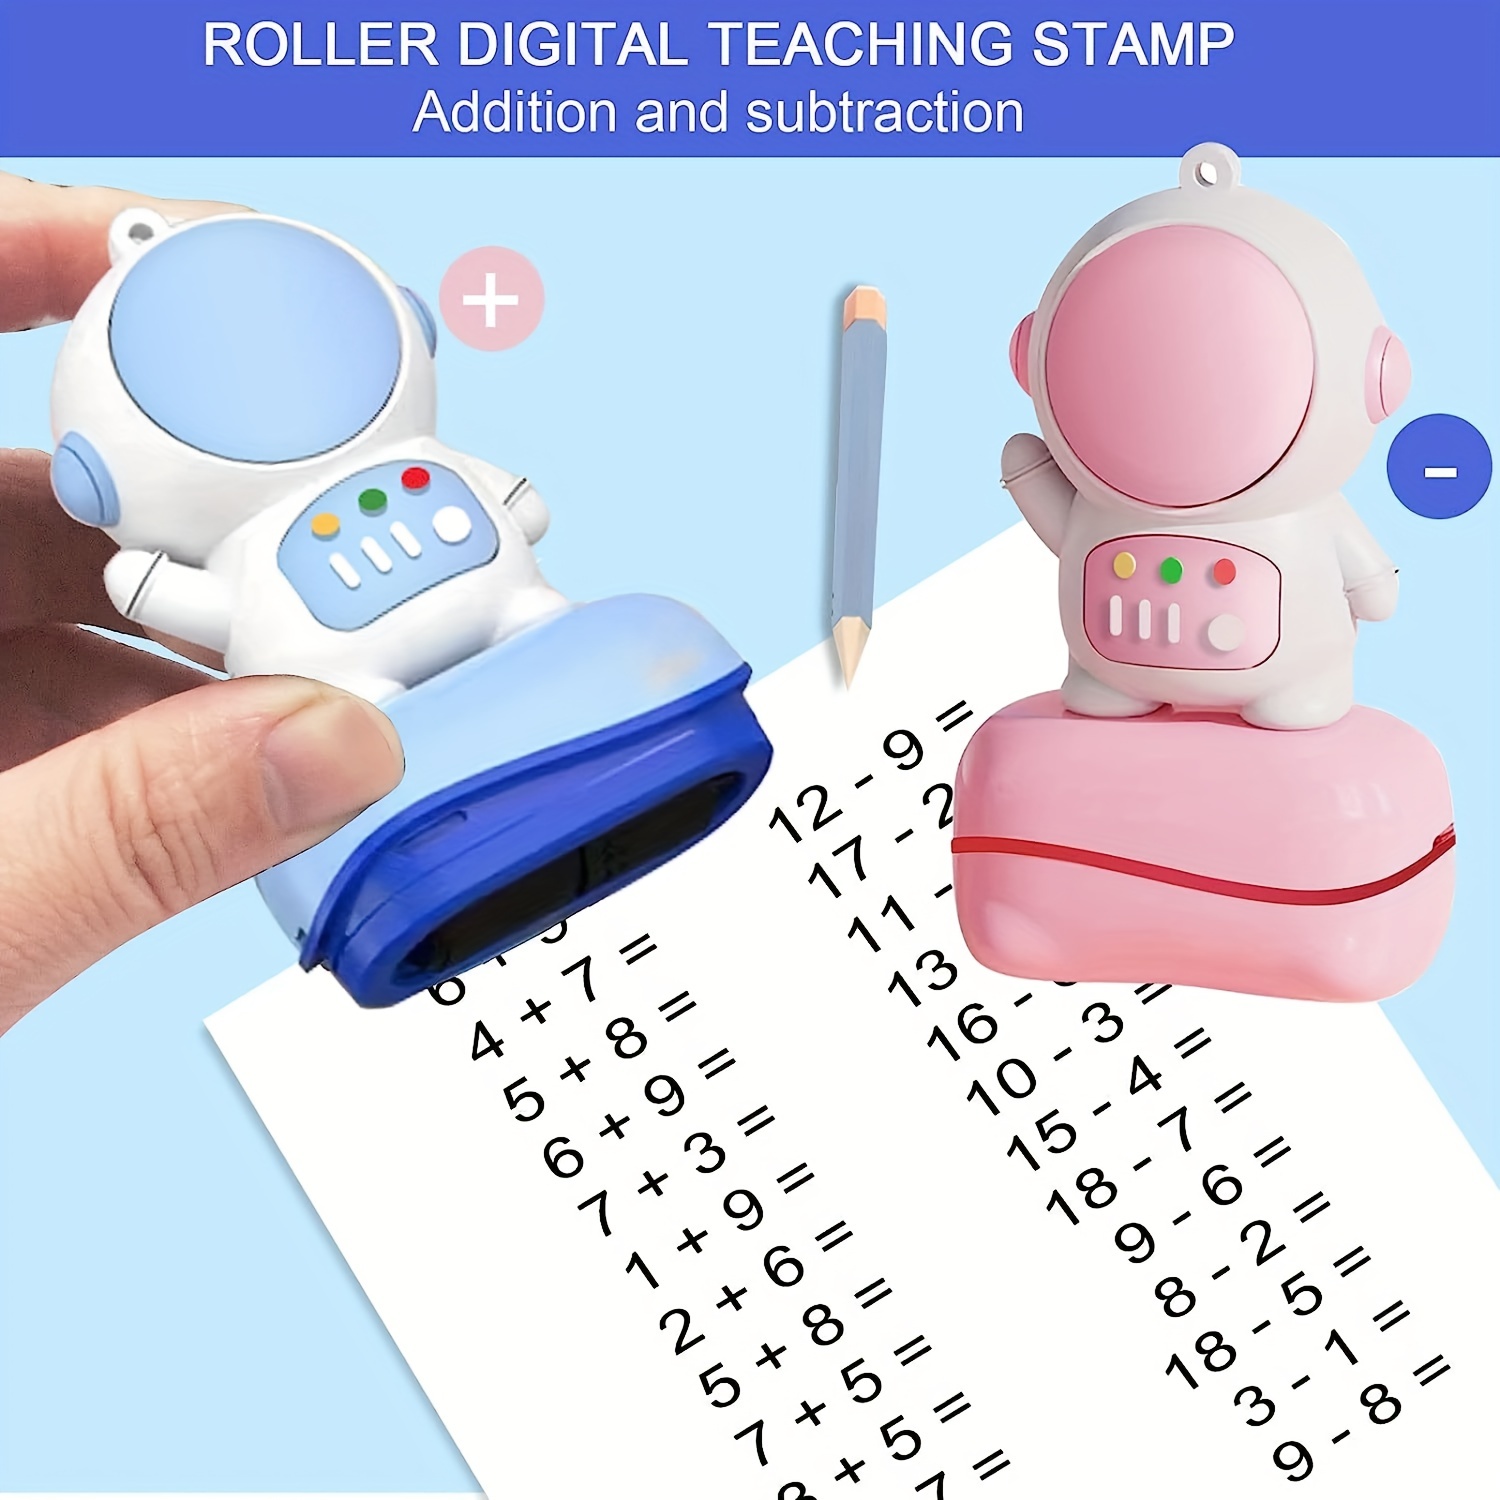 Teaching Stamps For Kids,2 In 1 Math Practice Stamps Within 100,addition  And Subtraction Dual Head Smart Math Roller Stamp,math Learning Toy For  Presc